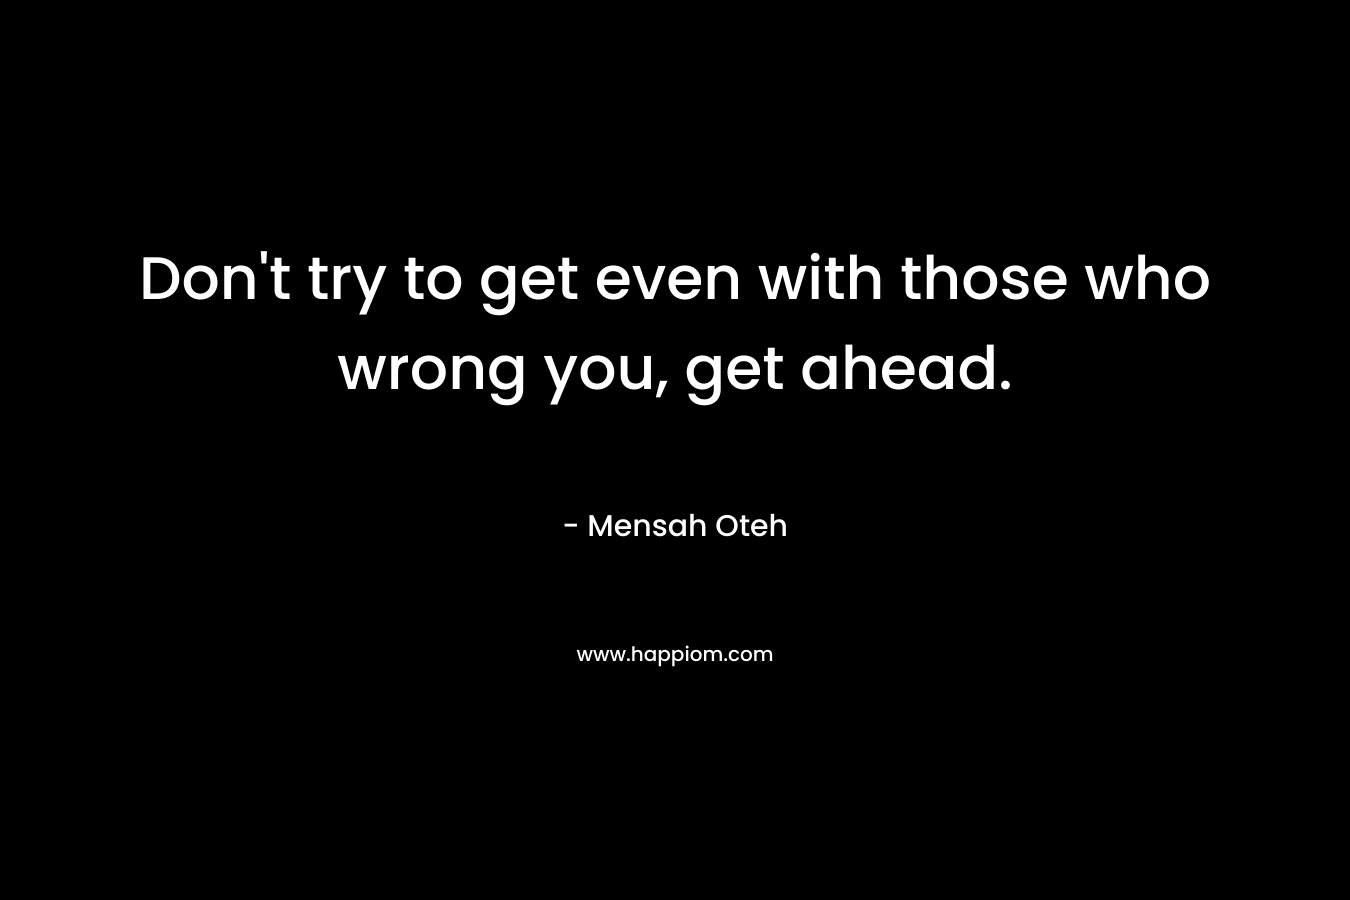 Don’t try to get even with those who wrong you, get ahead. – Mensah Oteh